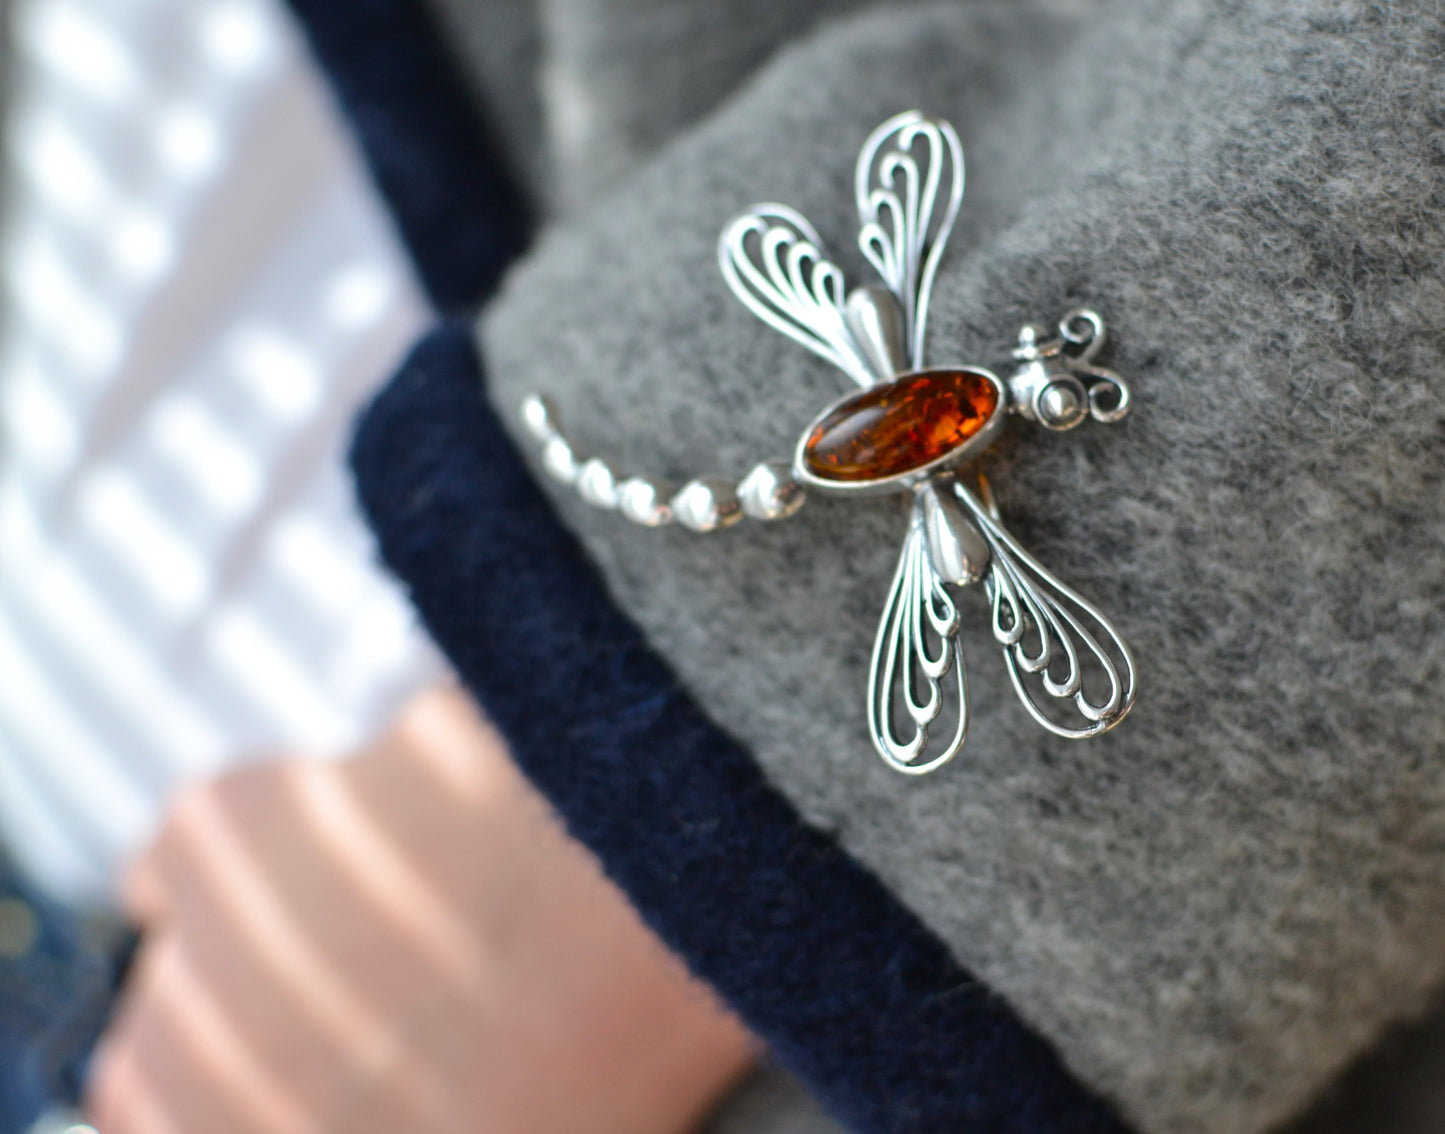 Amber sterling silver brooch dragonfly bug jewelry silver dragonfly